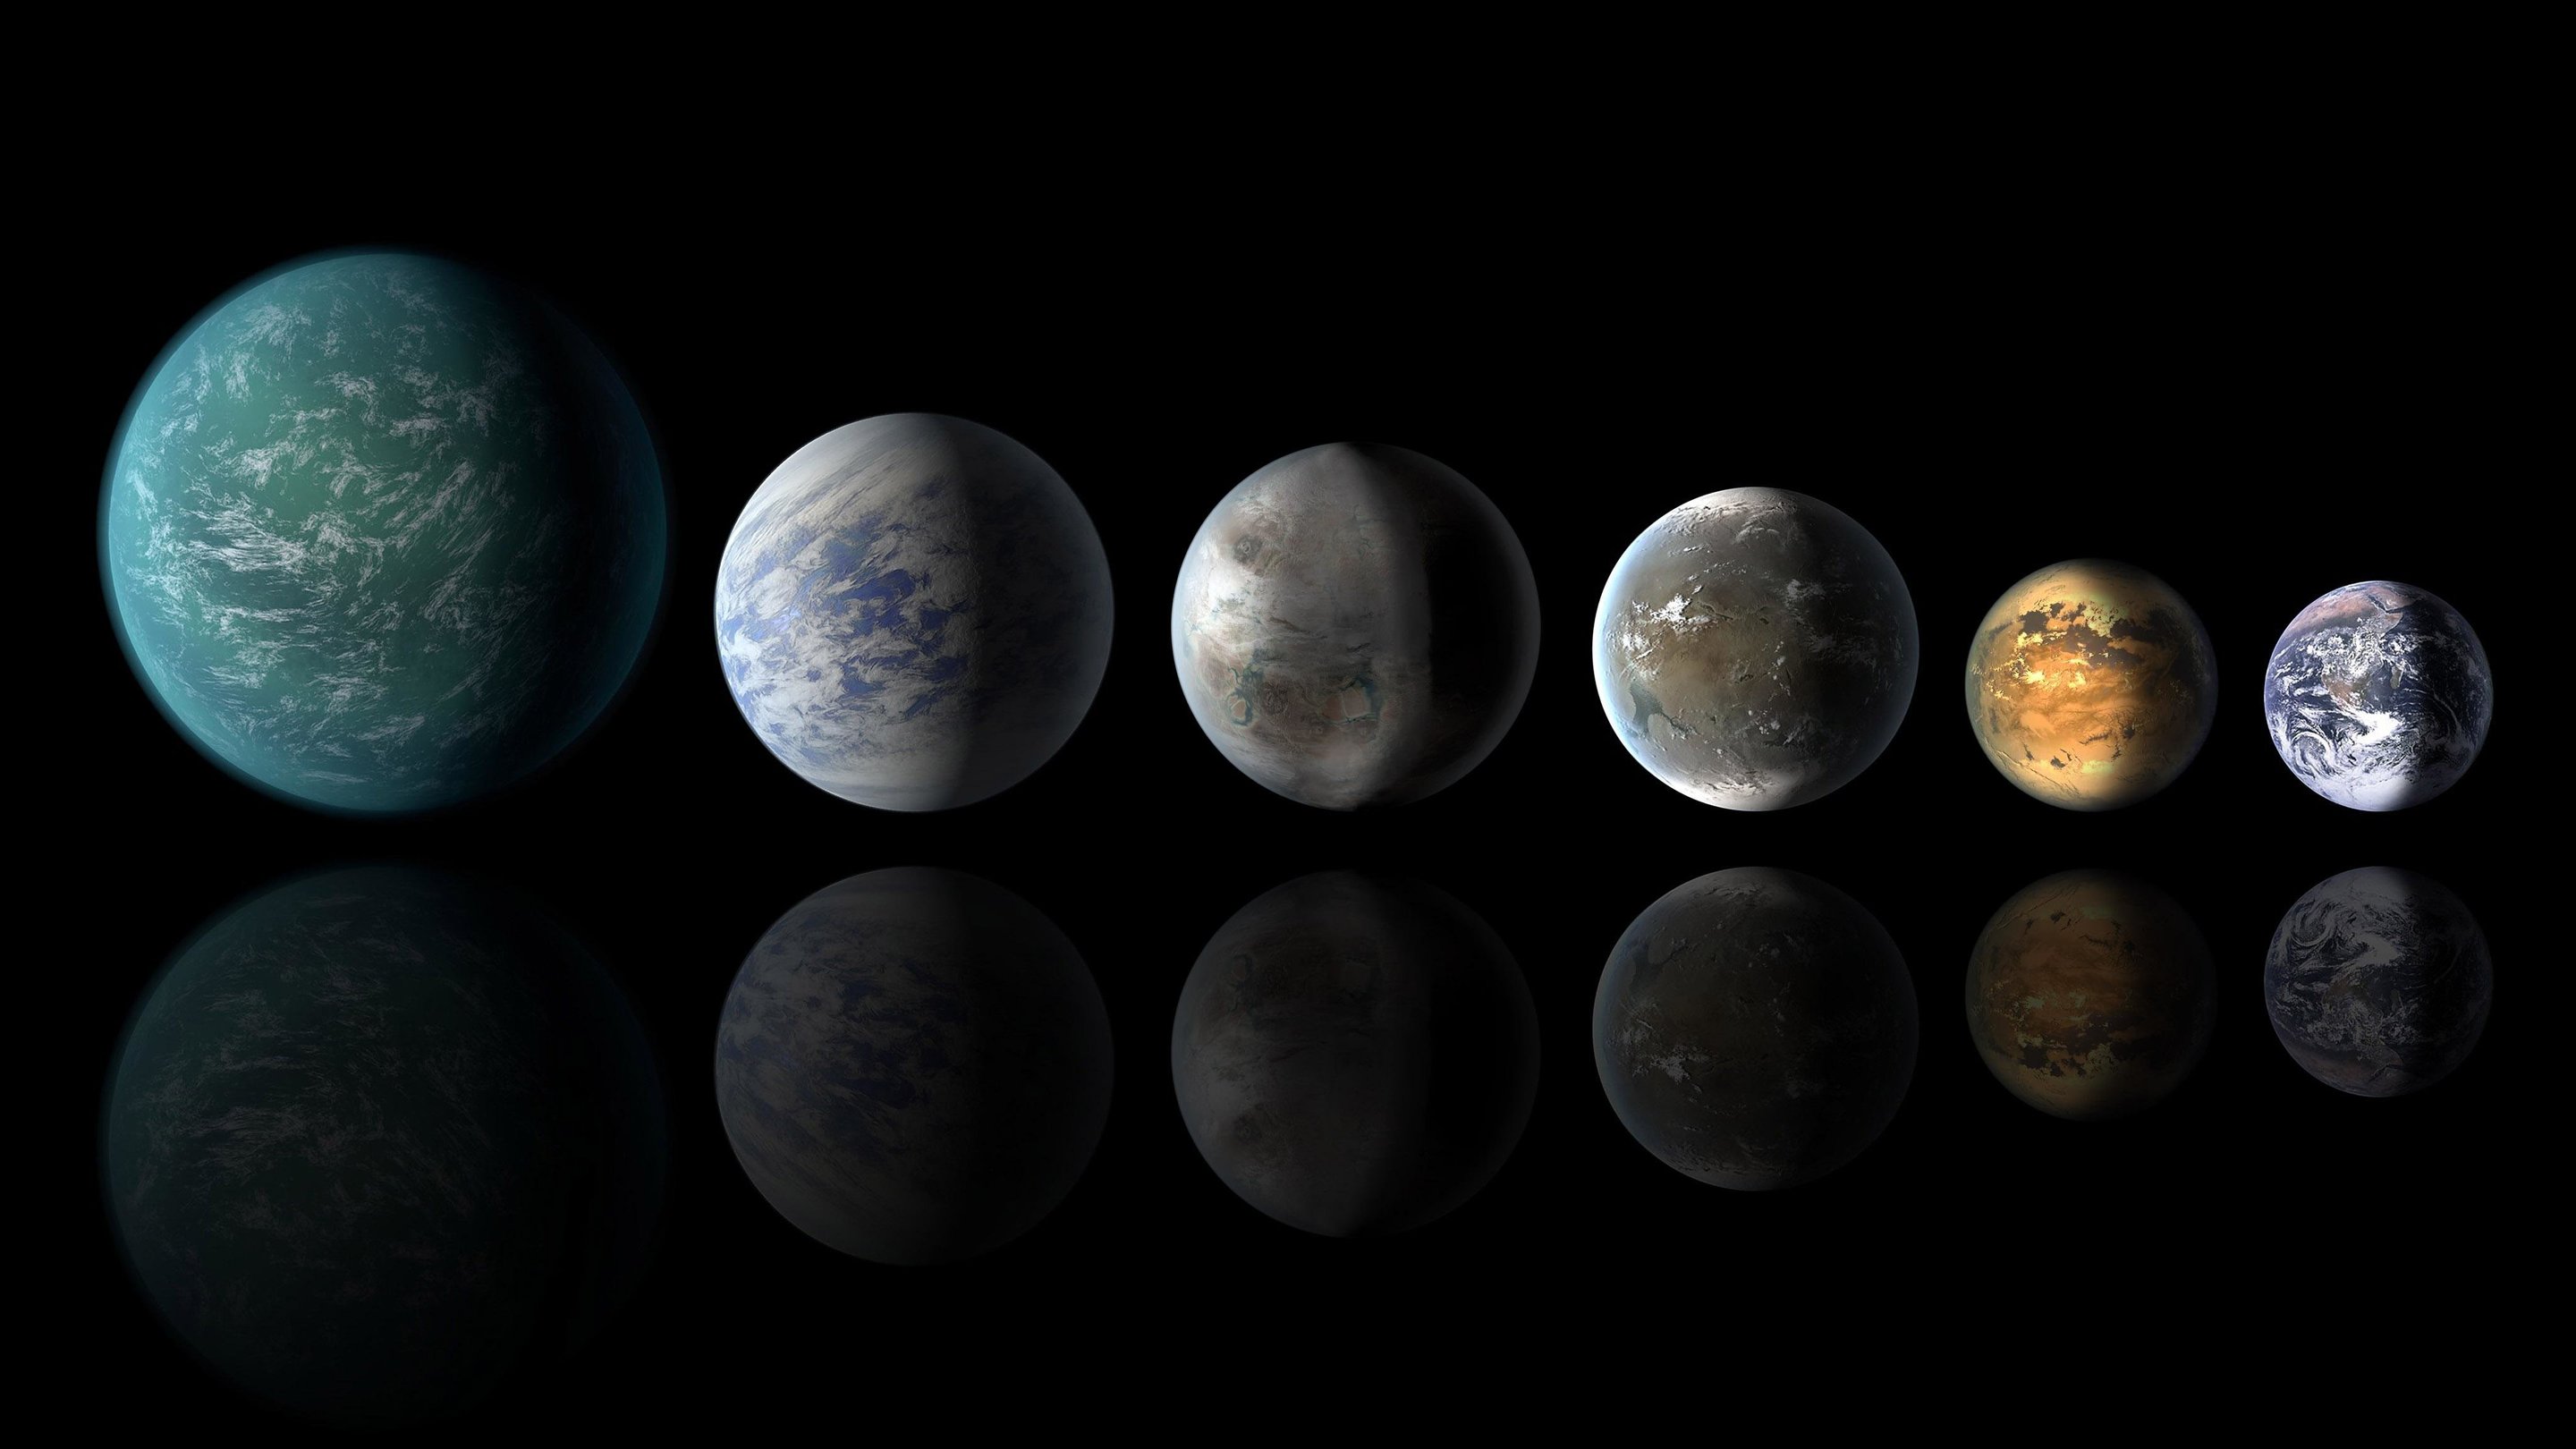 Water-worlds are common: Exoplanets may contain vast amounts of water